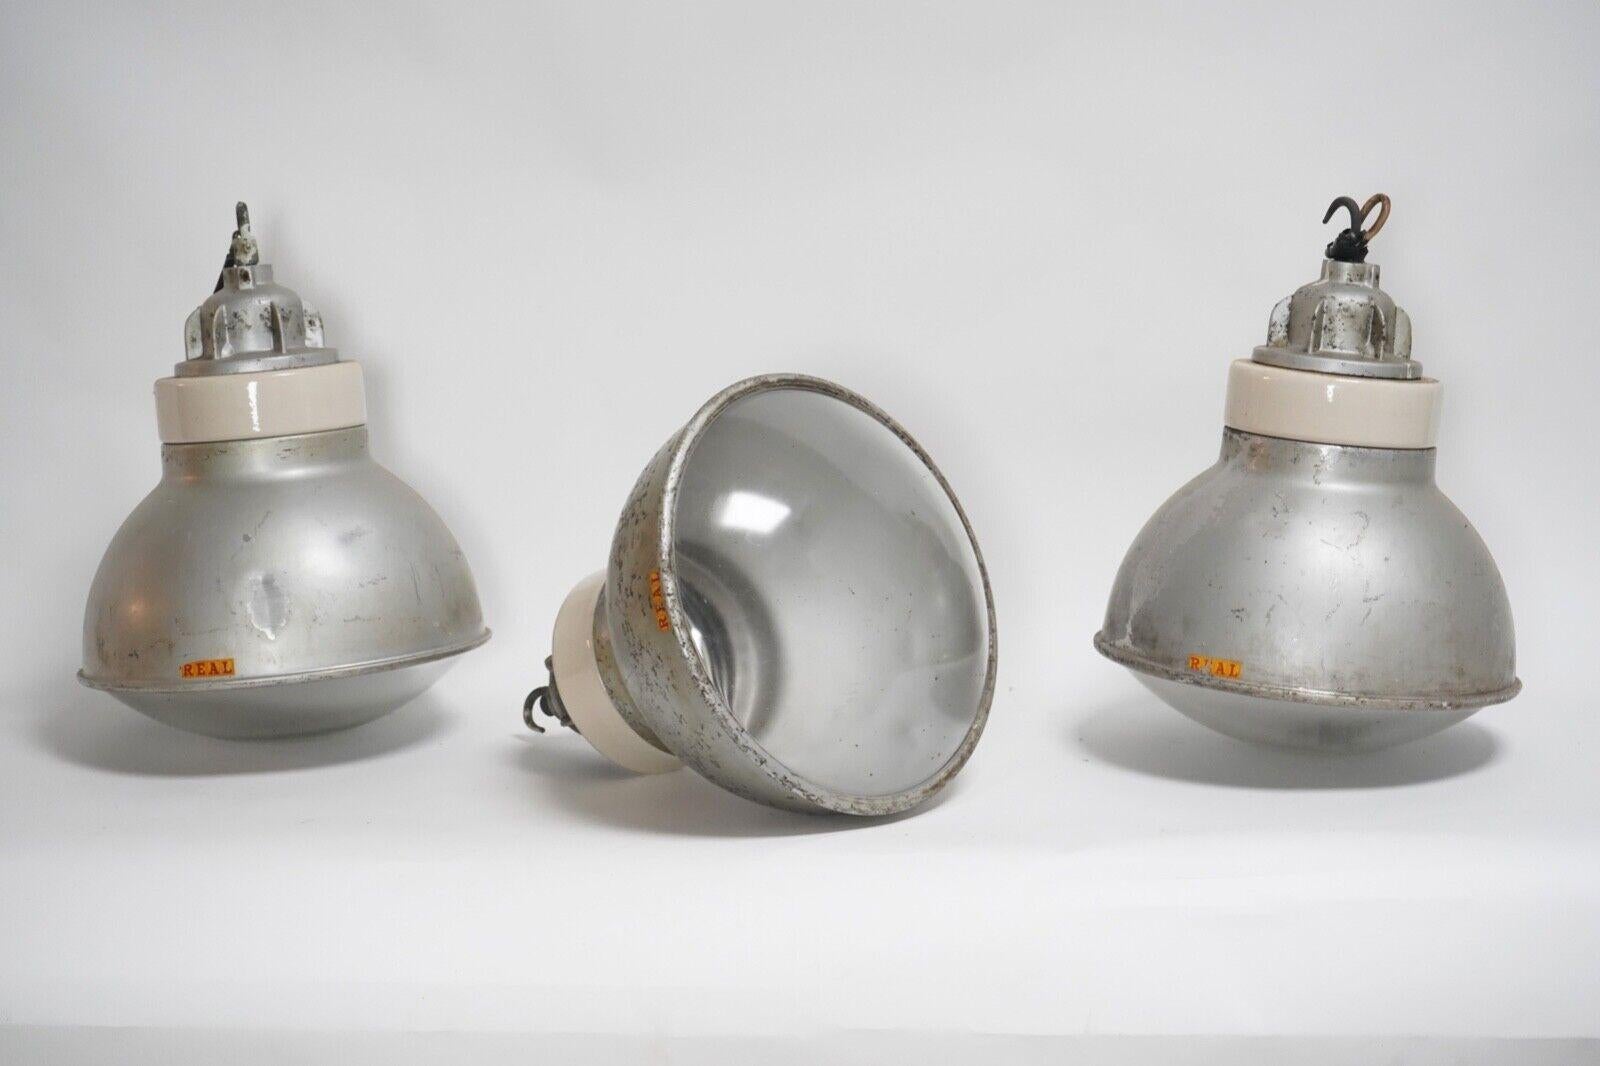 Vintage Industrial Factory Pendant Lights by Simplex - Aluminium & Glass Lamp In Good Condition For Sale In Dorchester, GB